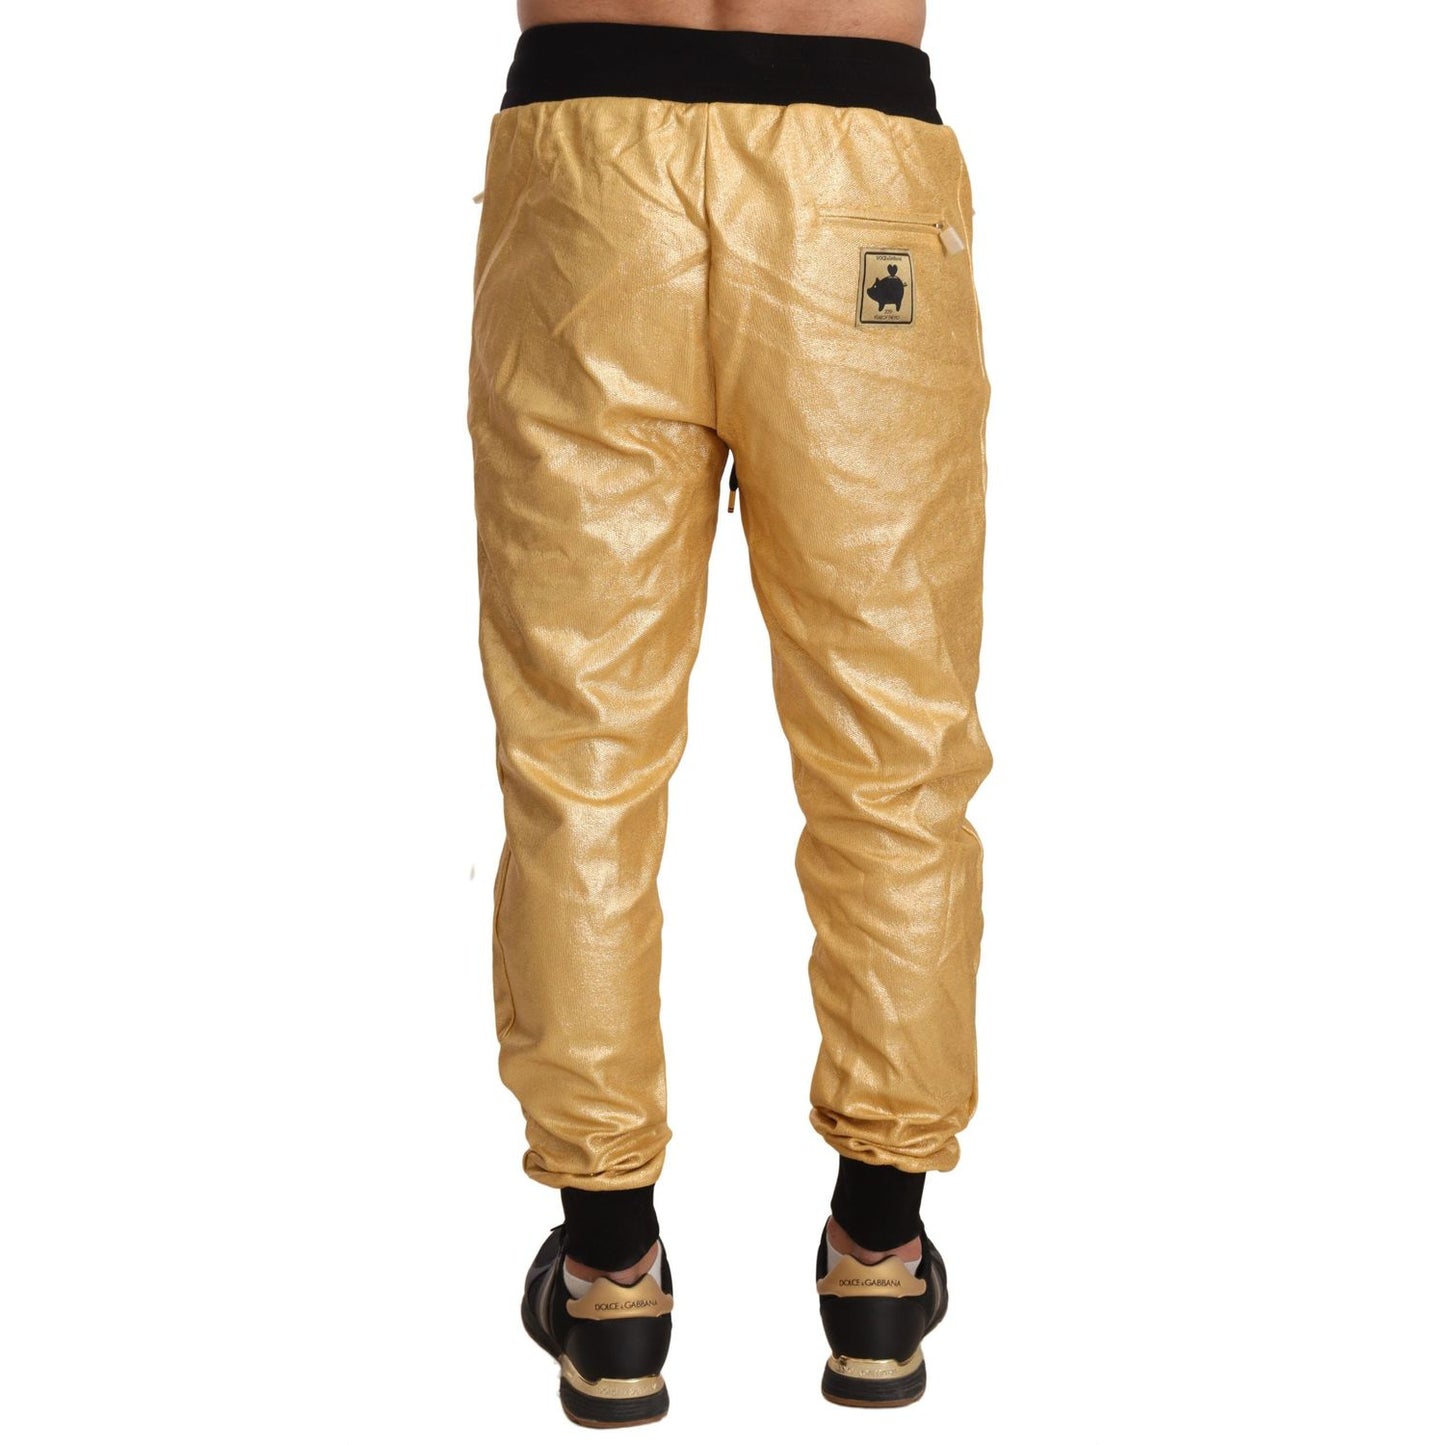 Dolce & Gabbana | Gold Pig Of The Year Cotton Trousers Pants | McRichard Designer Brands